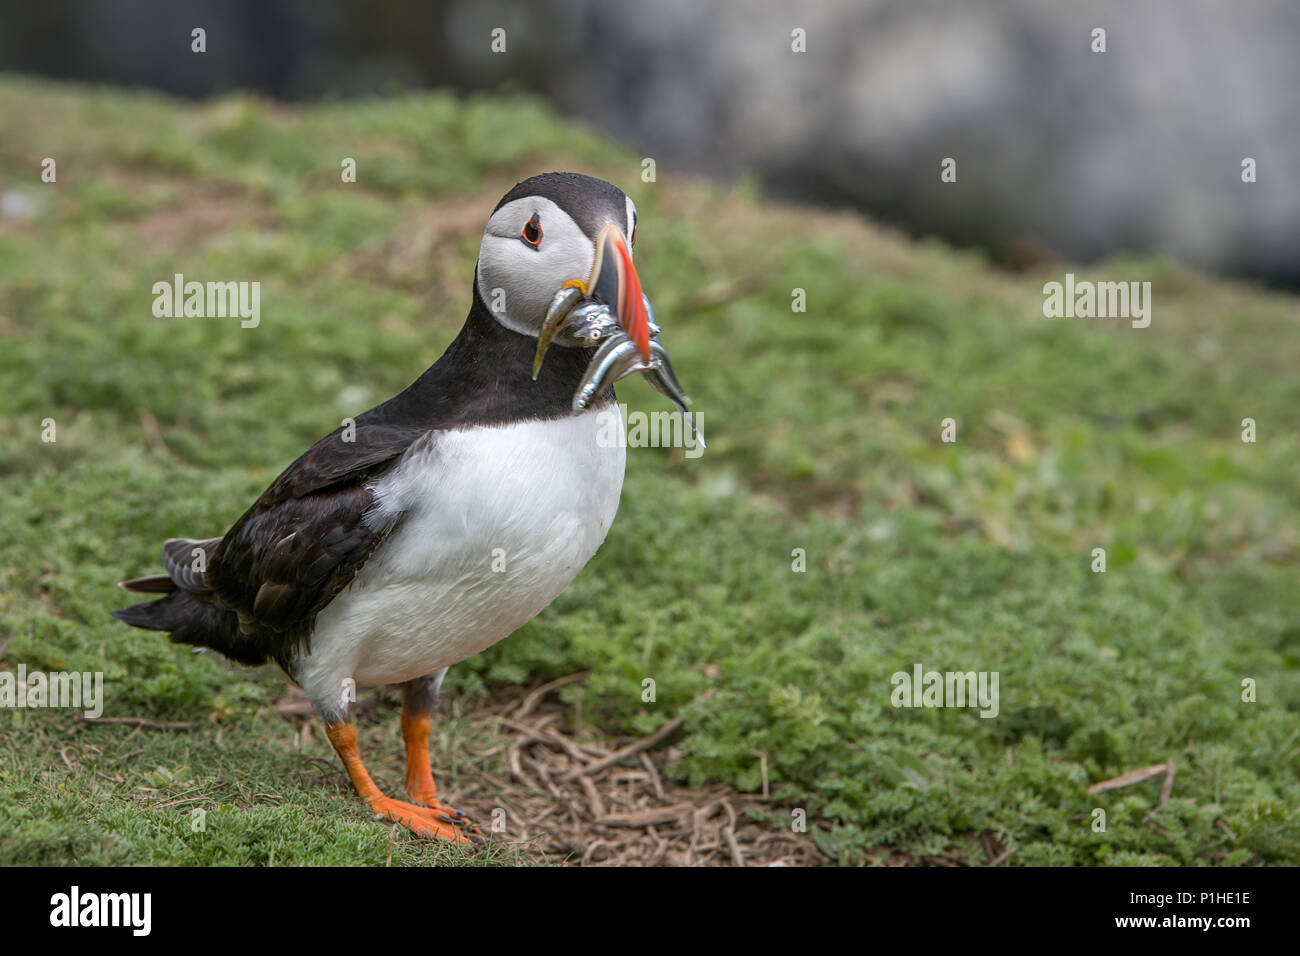 Puffins with Beak Full of Sand Eels Stock Photo